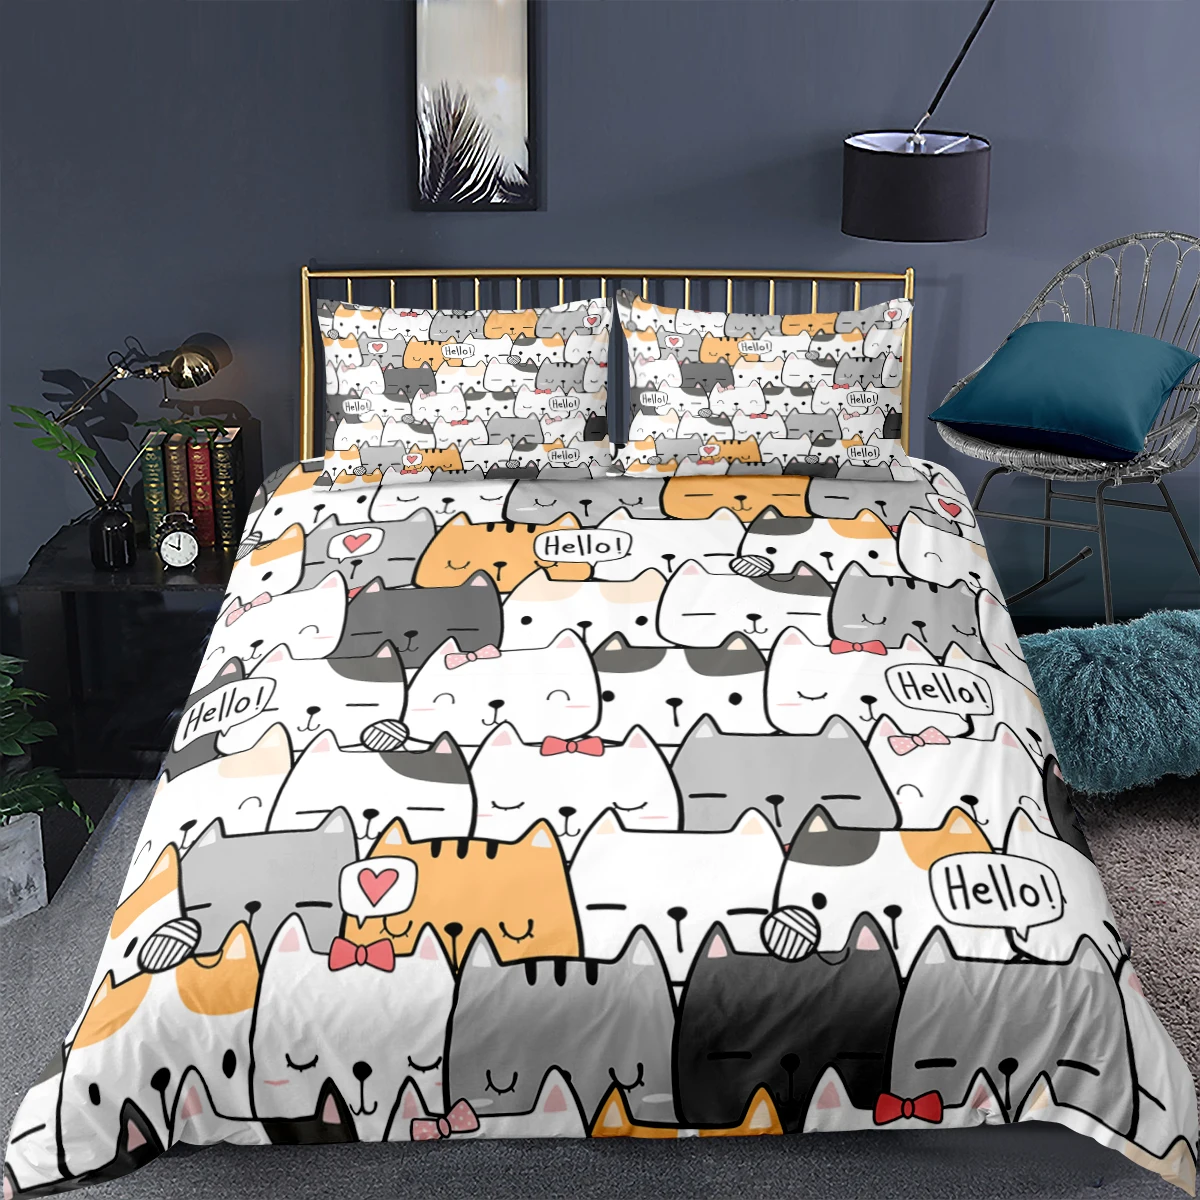 Cat Duvet Cover Set Queen Bed Cover Set Kids Comforter Bed Linen King Size Home Textiles For Childrens